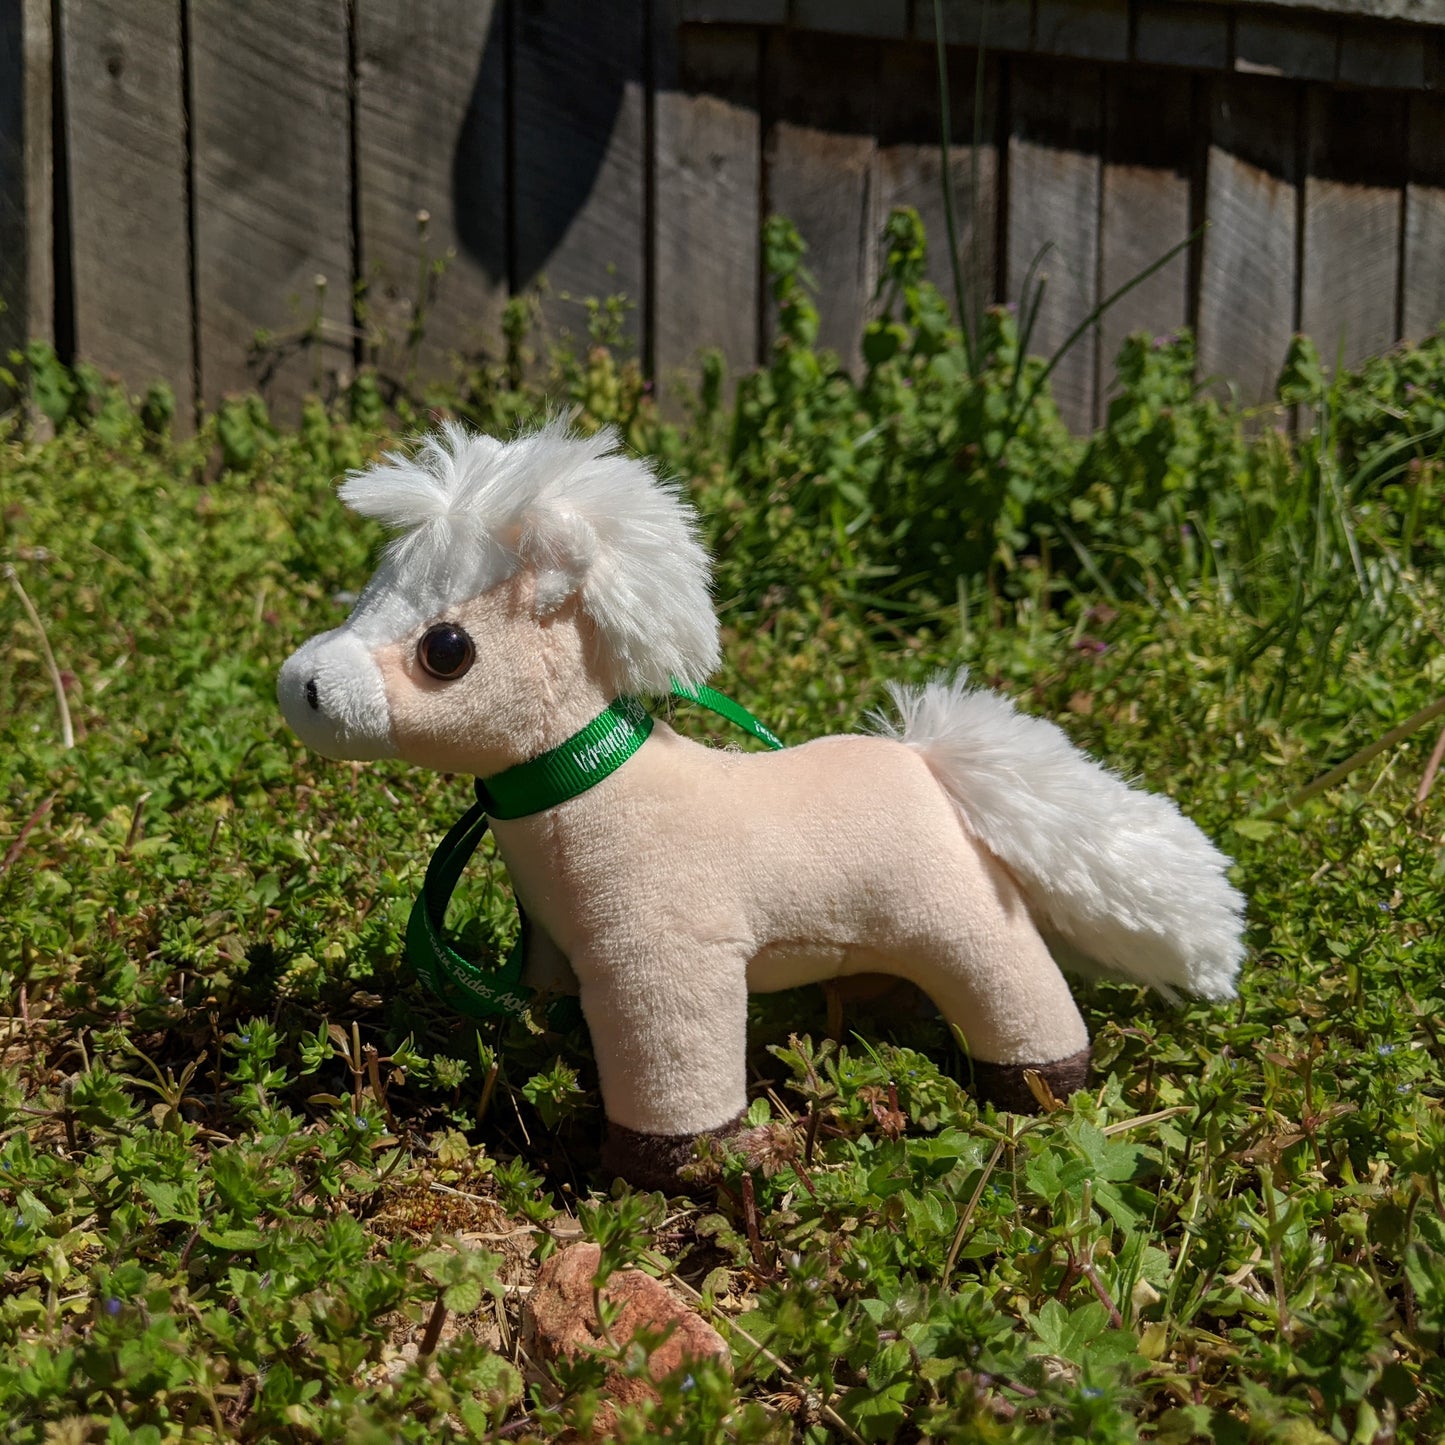 Biscuit Plush Toy Horse Character from the book series The Adventures of Cowboy Cinch & Wrangler Rein